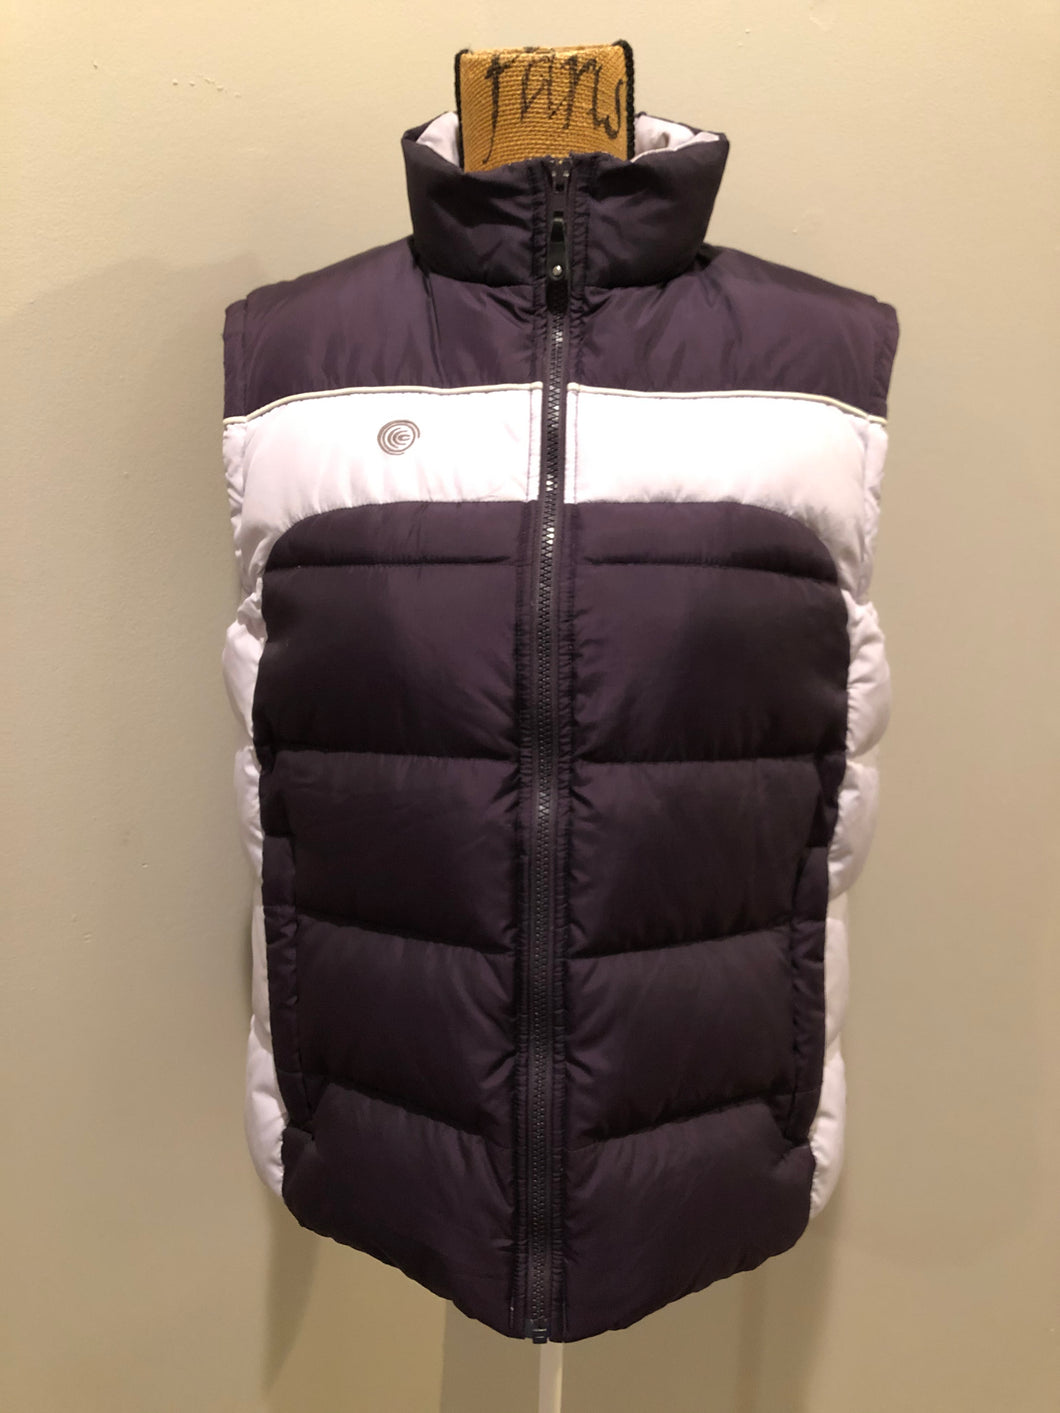 Kingspier Vintage - Columbia dark and light purple down filled puffer vest with zipper closure, vertical zip pockets and inside pocket. Size large.